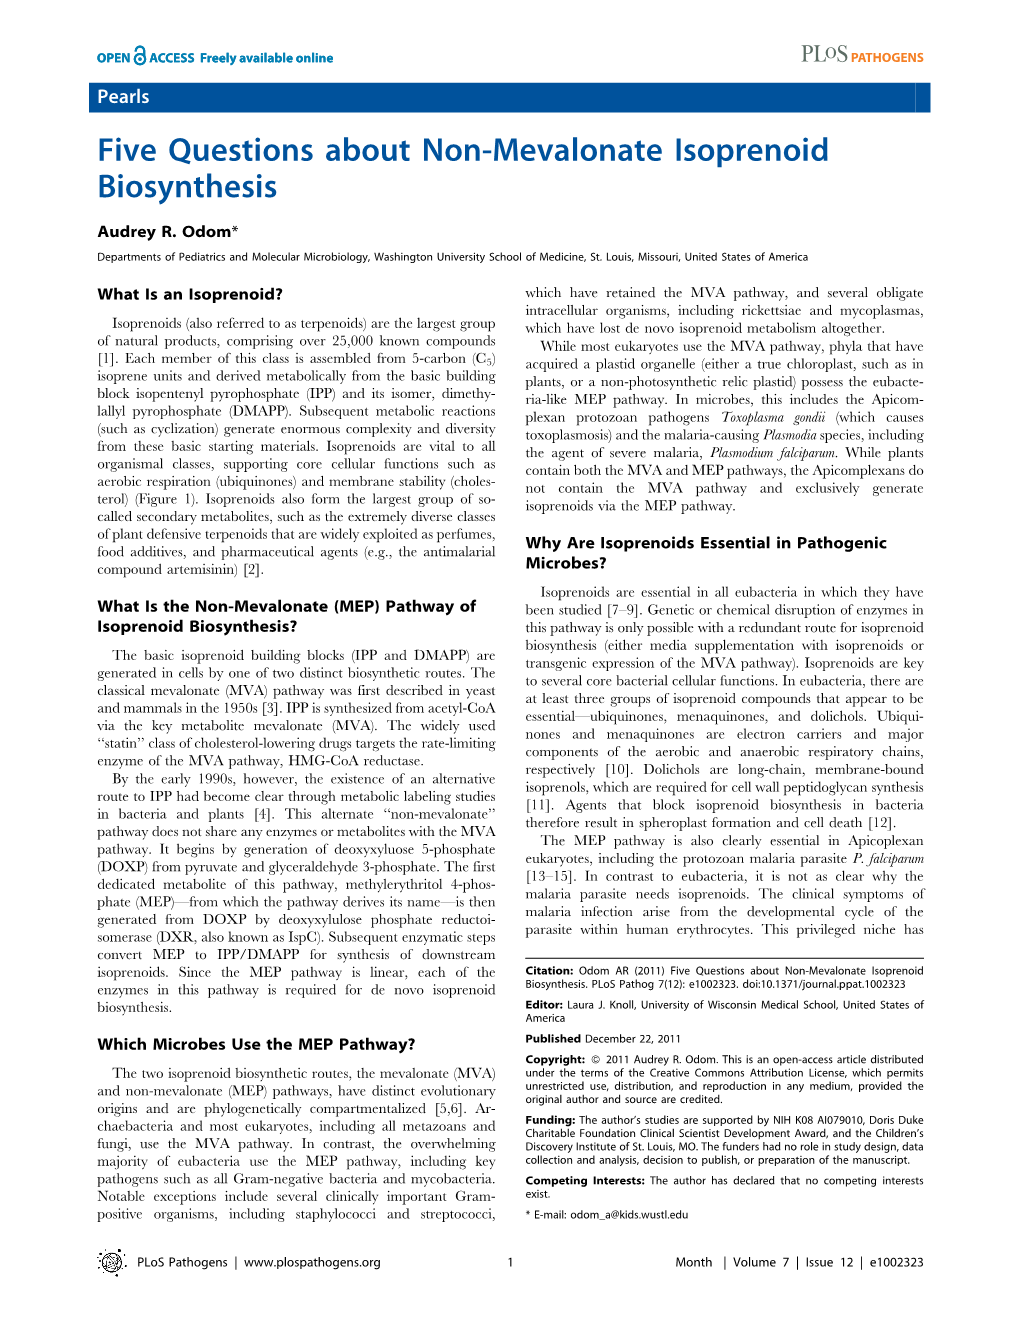 Five Questions About Non-Mevalonate Isoprenoid Biosynthesis